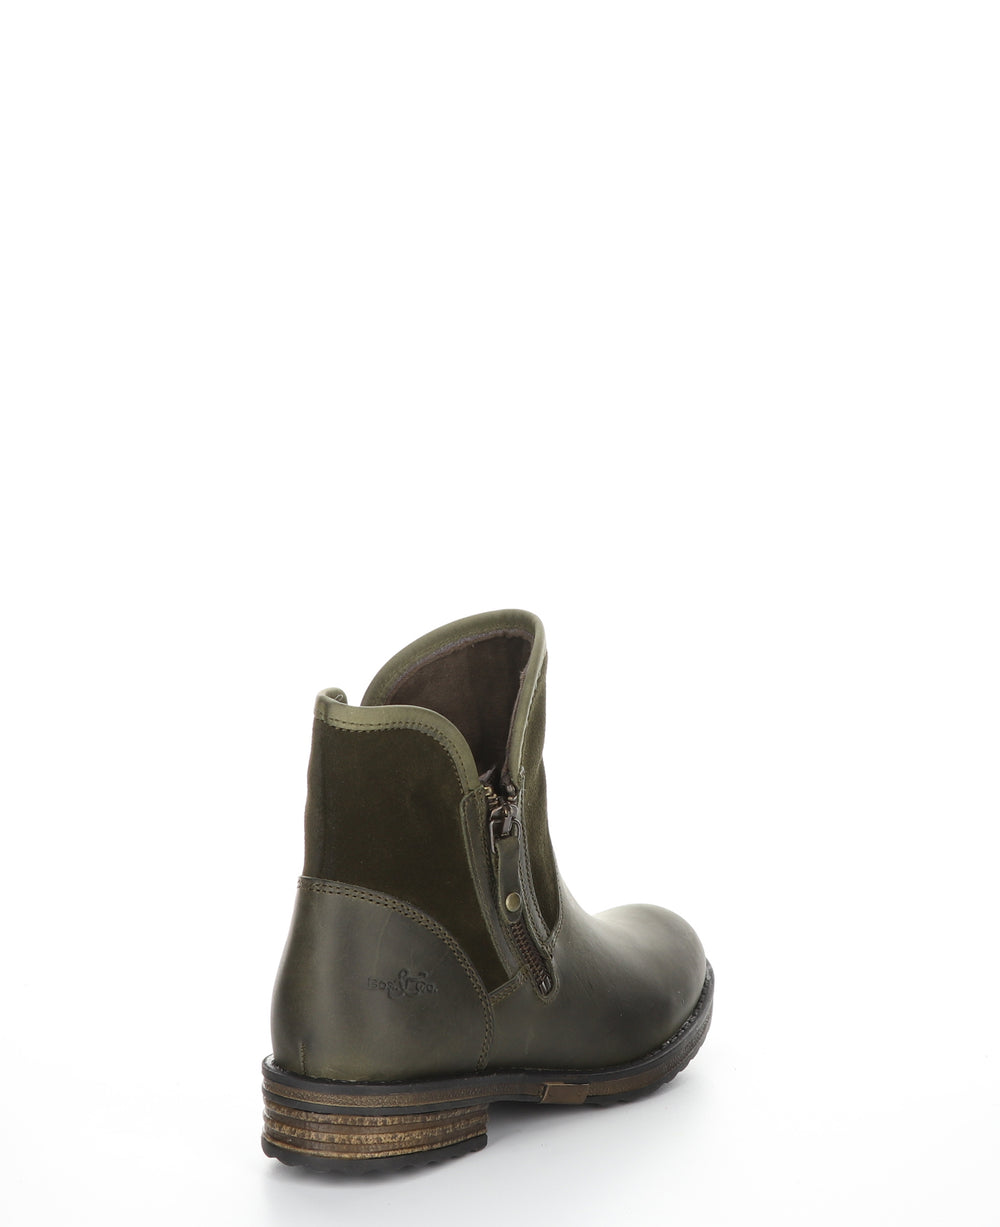 STRIVE Olive Zip Up Ankle Boots